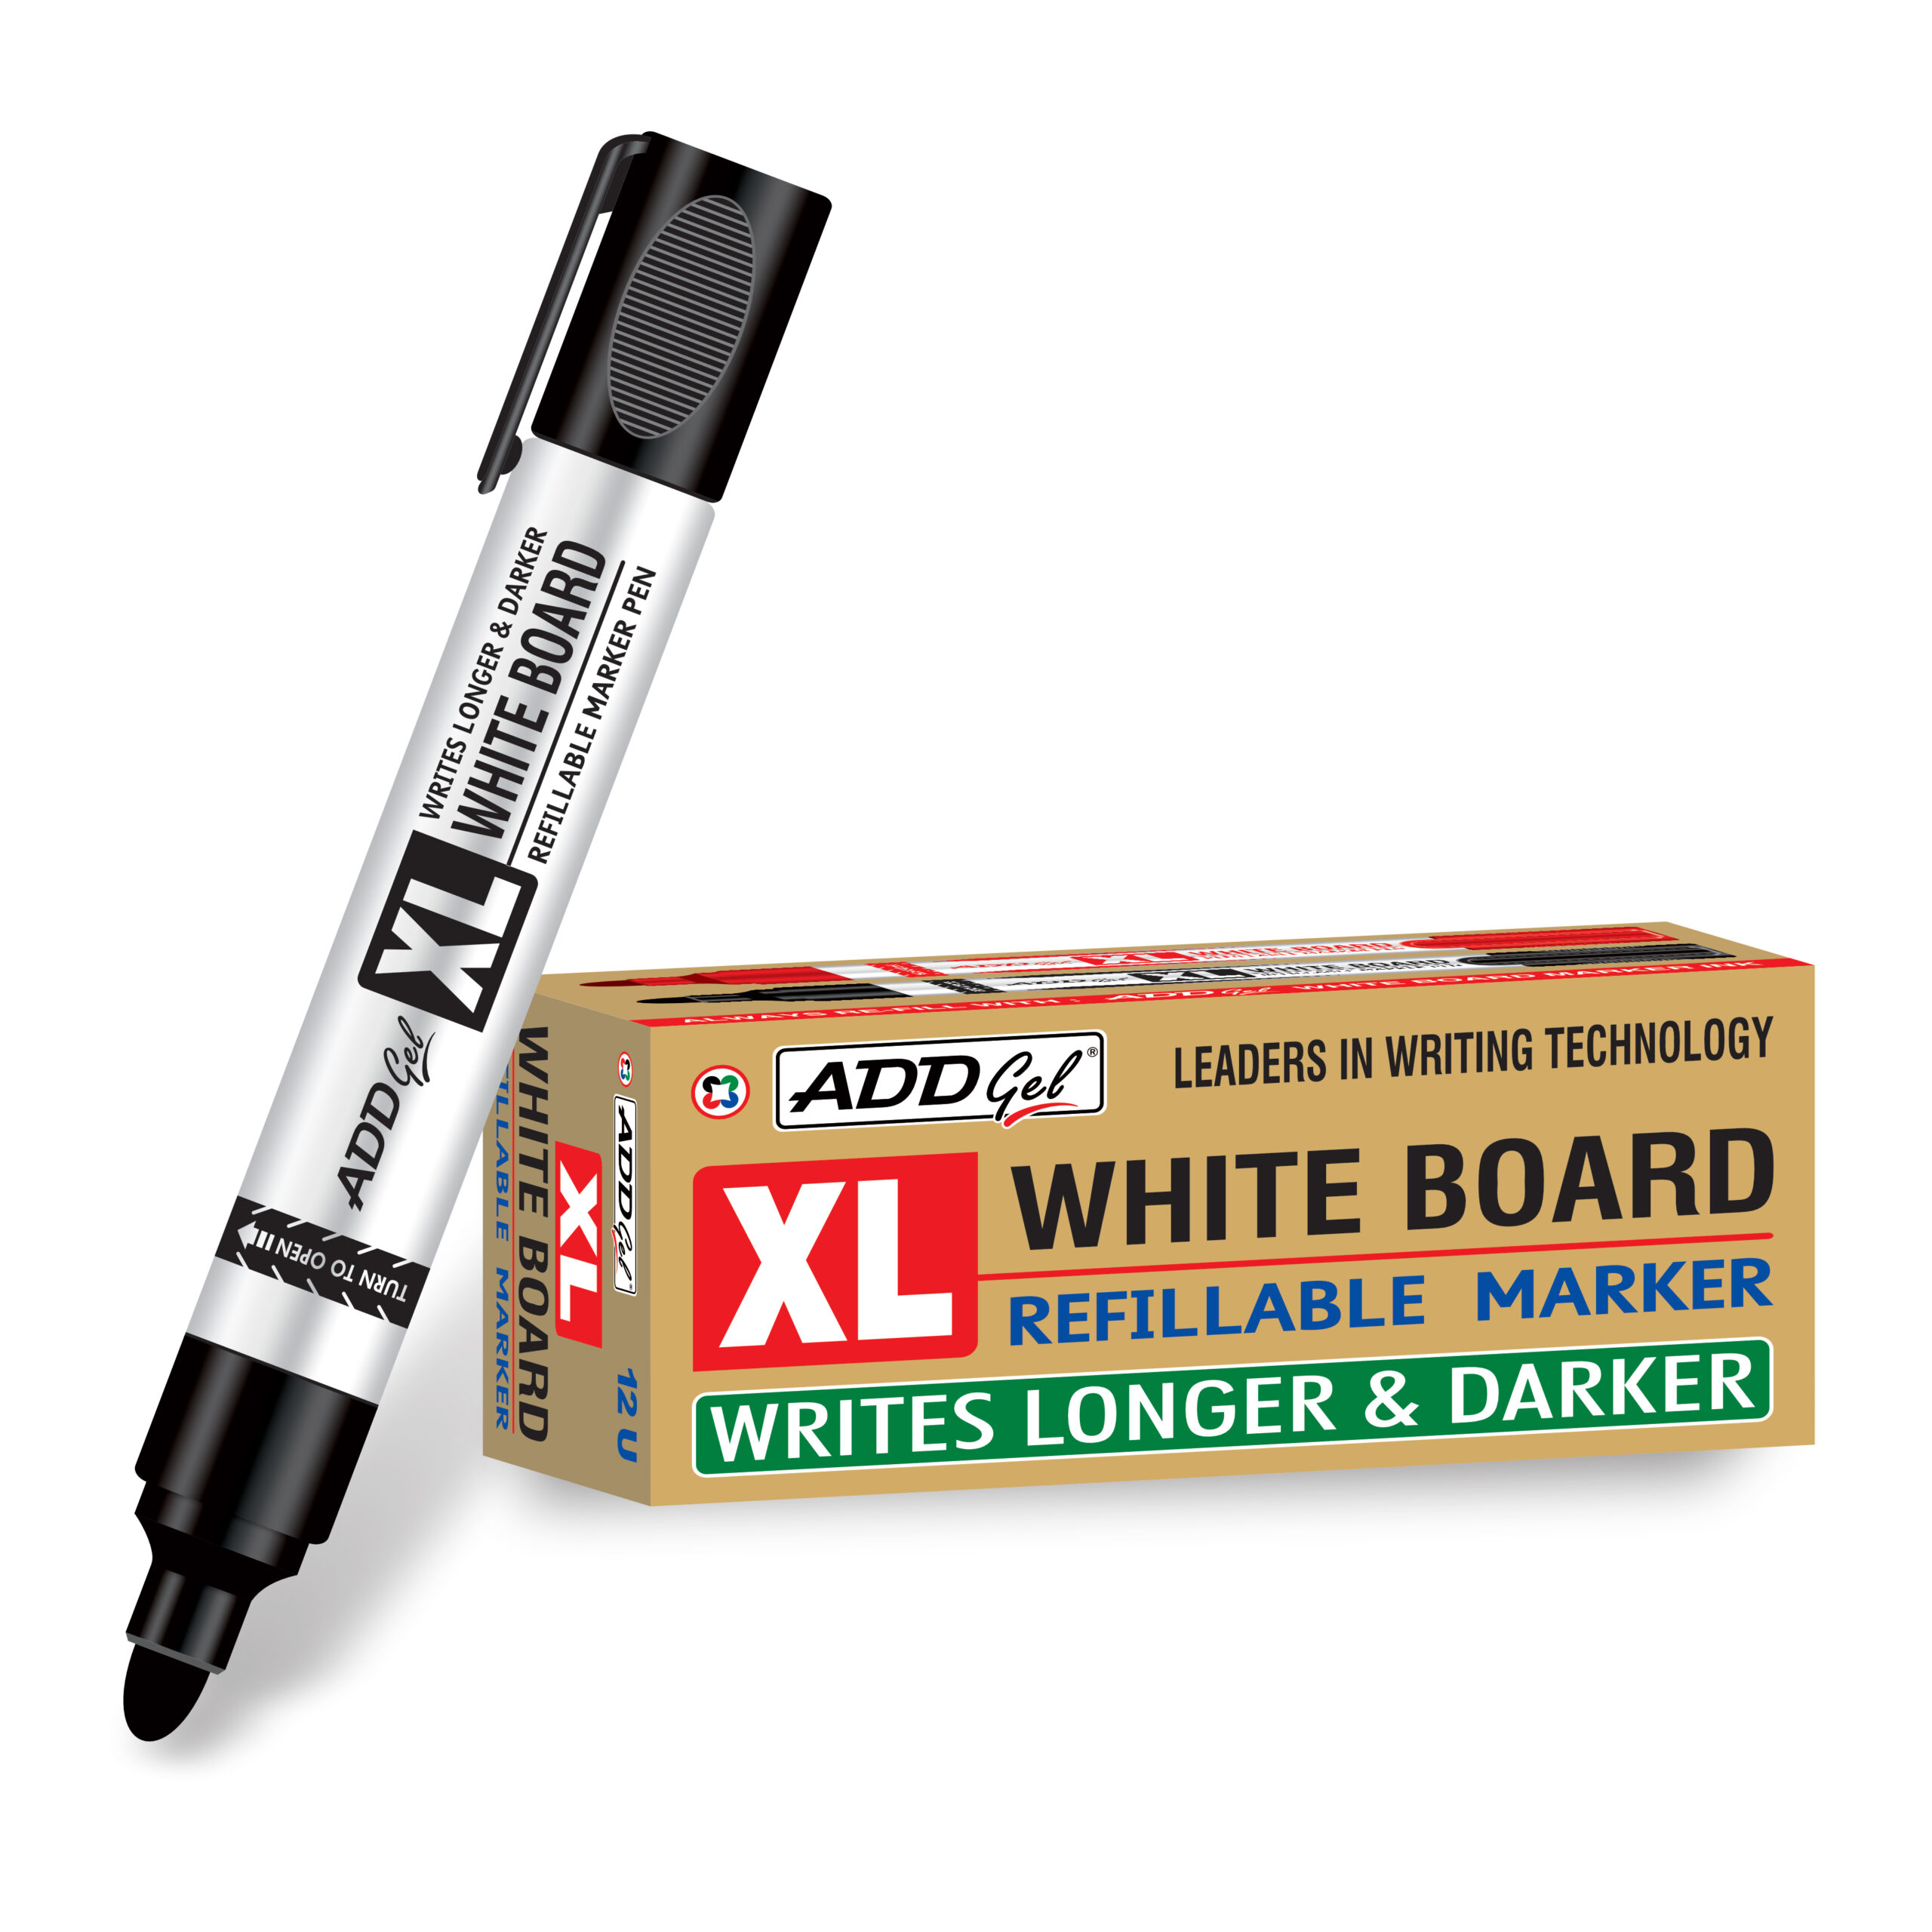 White and Black Paint Marker Combo 2-Pack